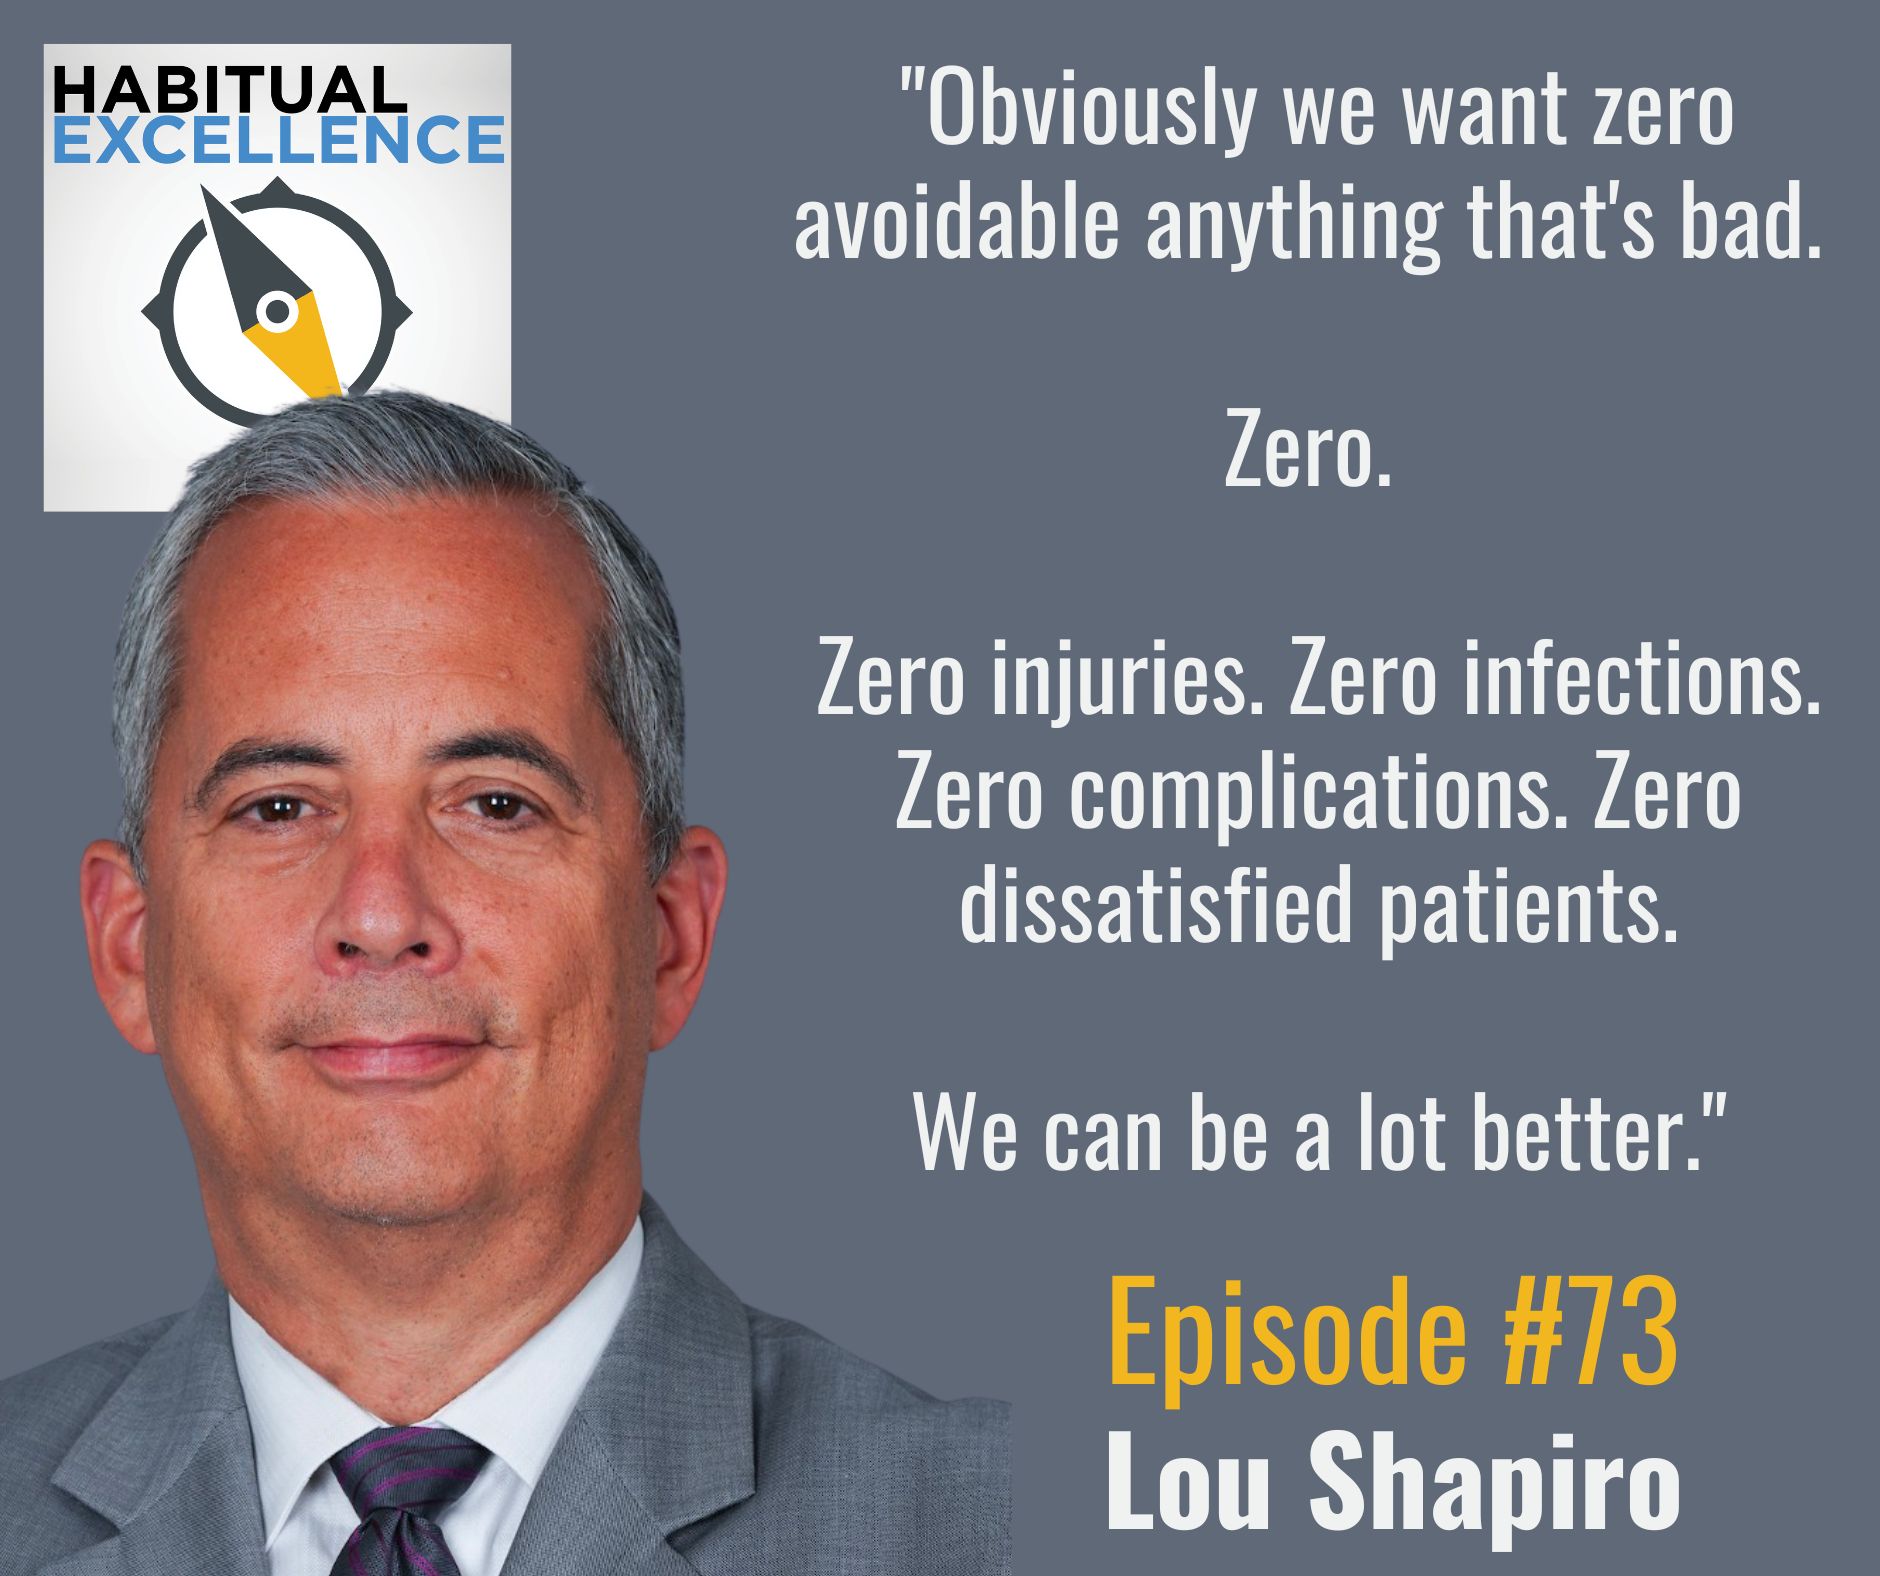 "Obviously we want zero avoidable anything that's bad.   Zero.   Zero injuries. Zero infections. Zero complications. Zero dissatisfied patients.  We can be a lot better."  